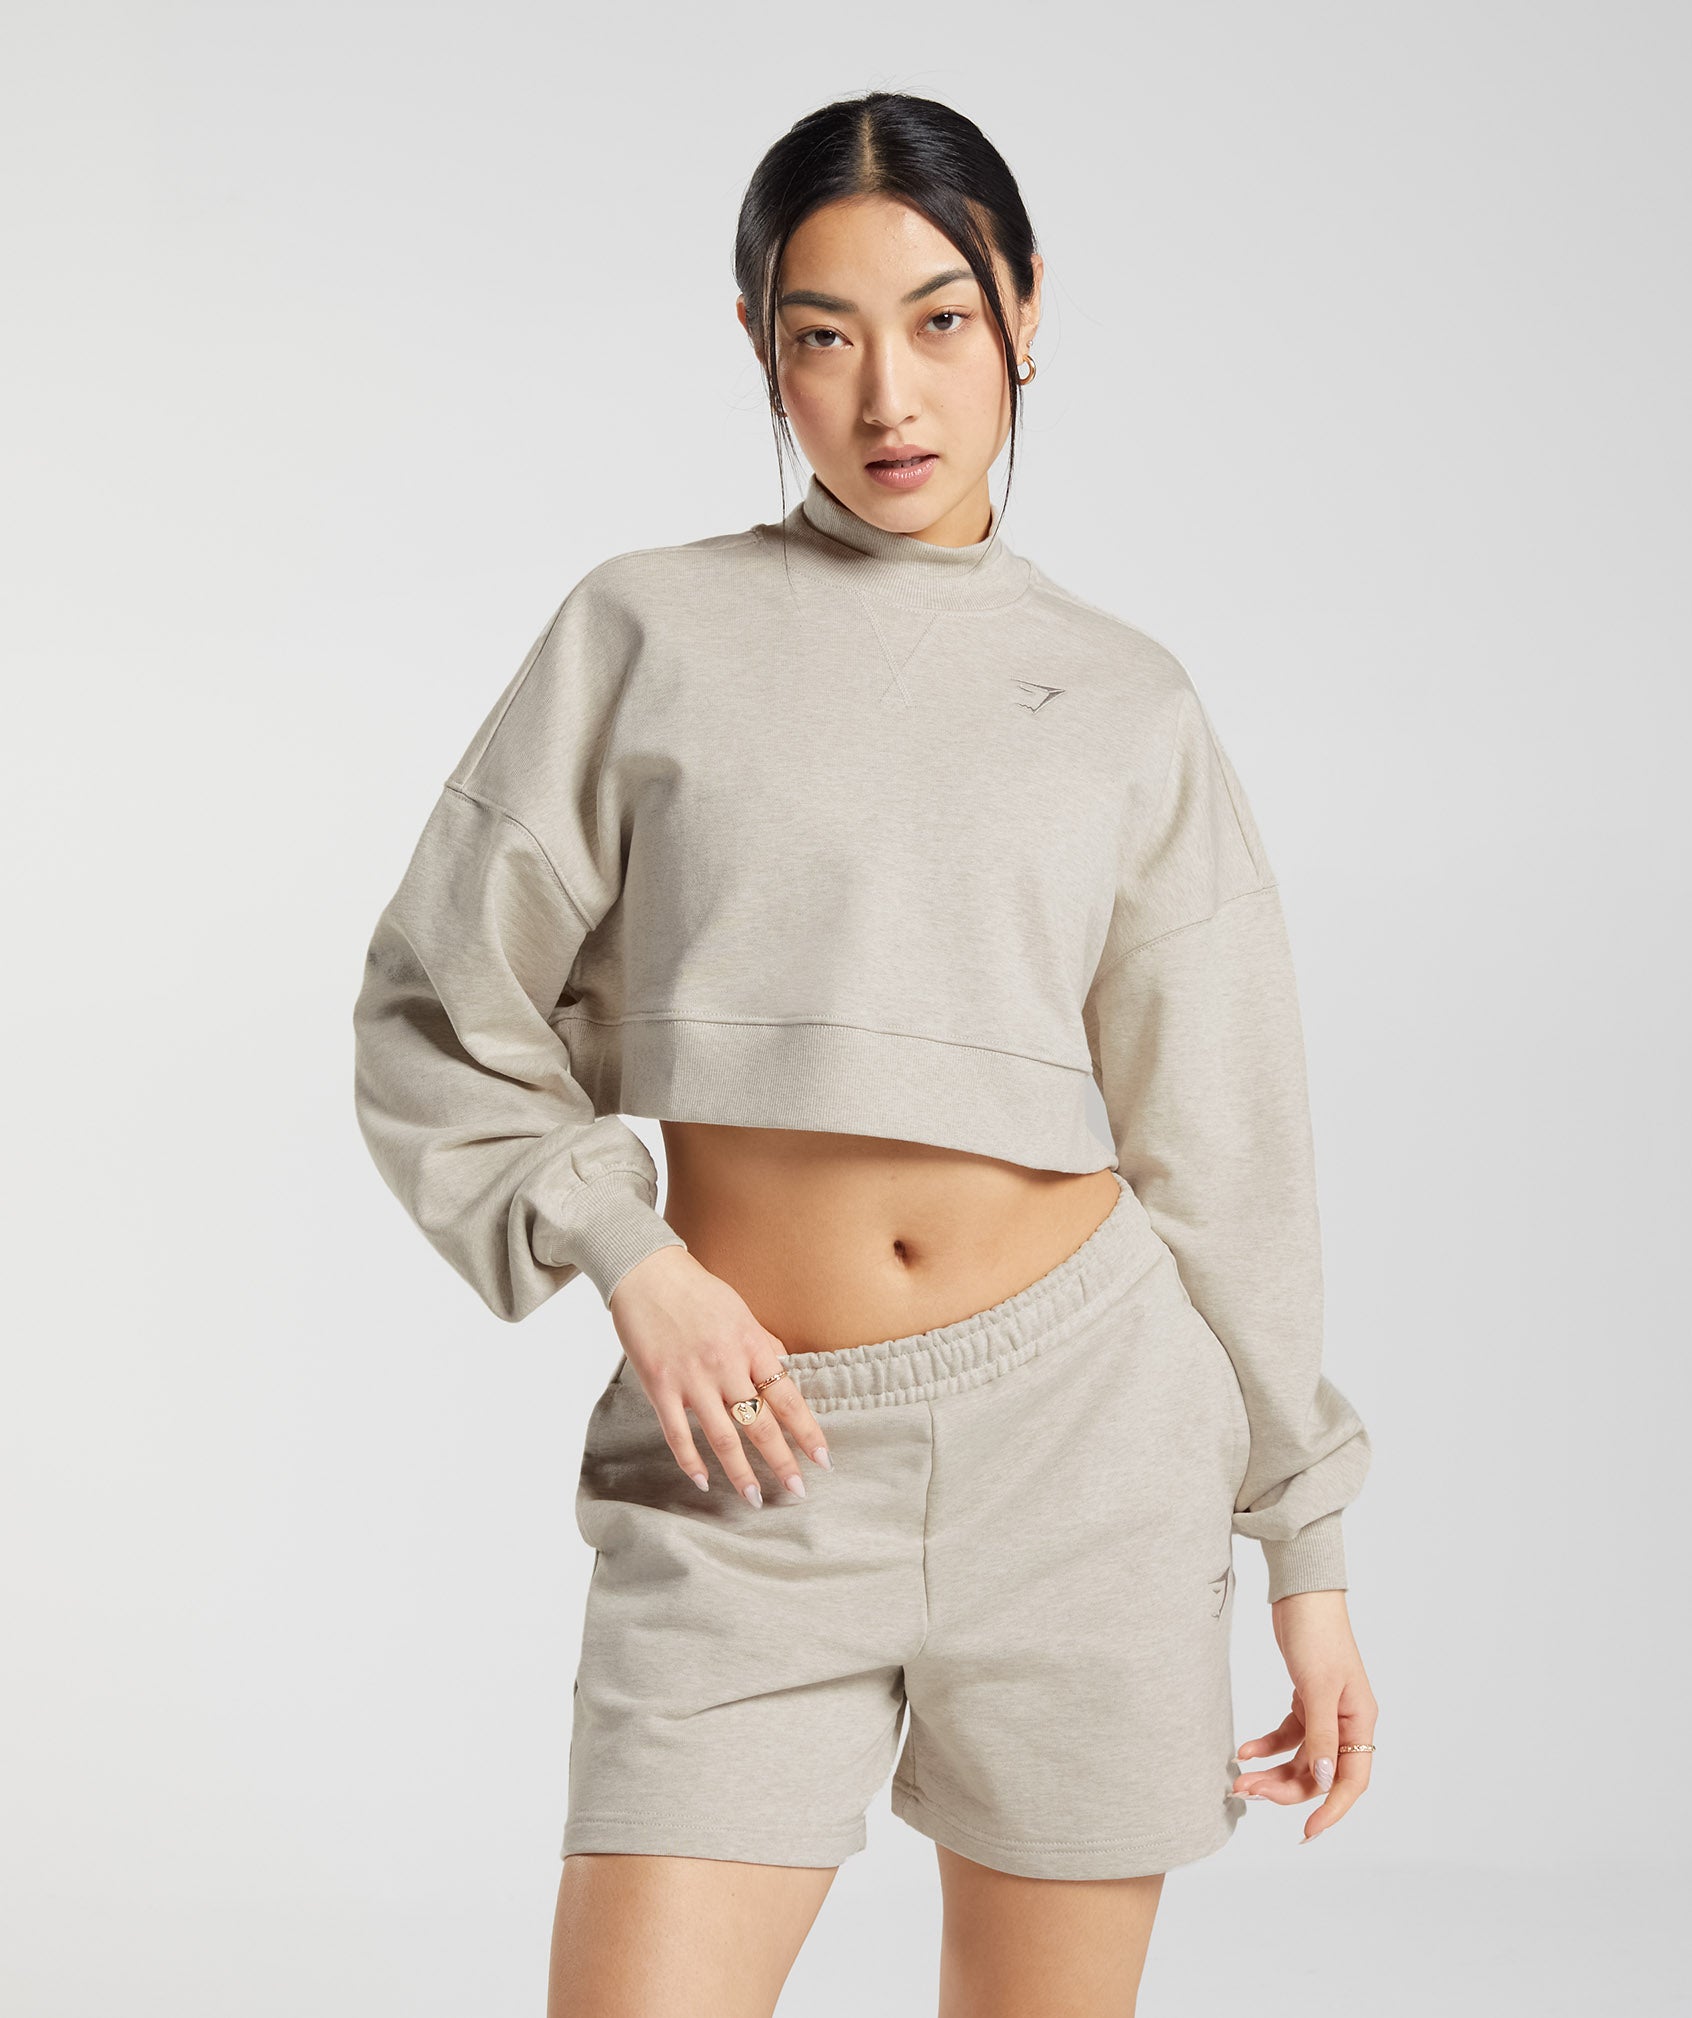 Rest Day Sweats Cropped Pullover in Sand Marl - view 2